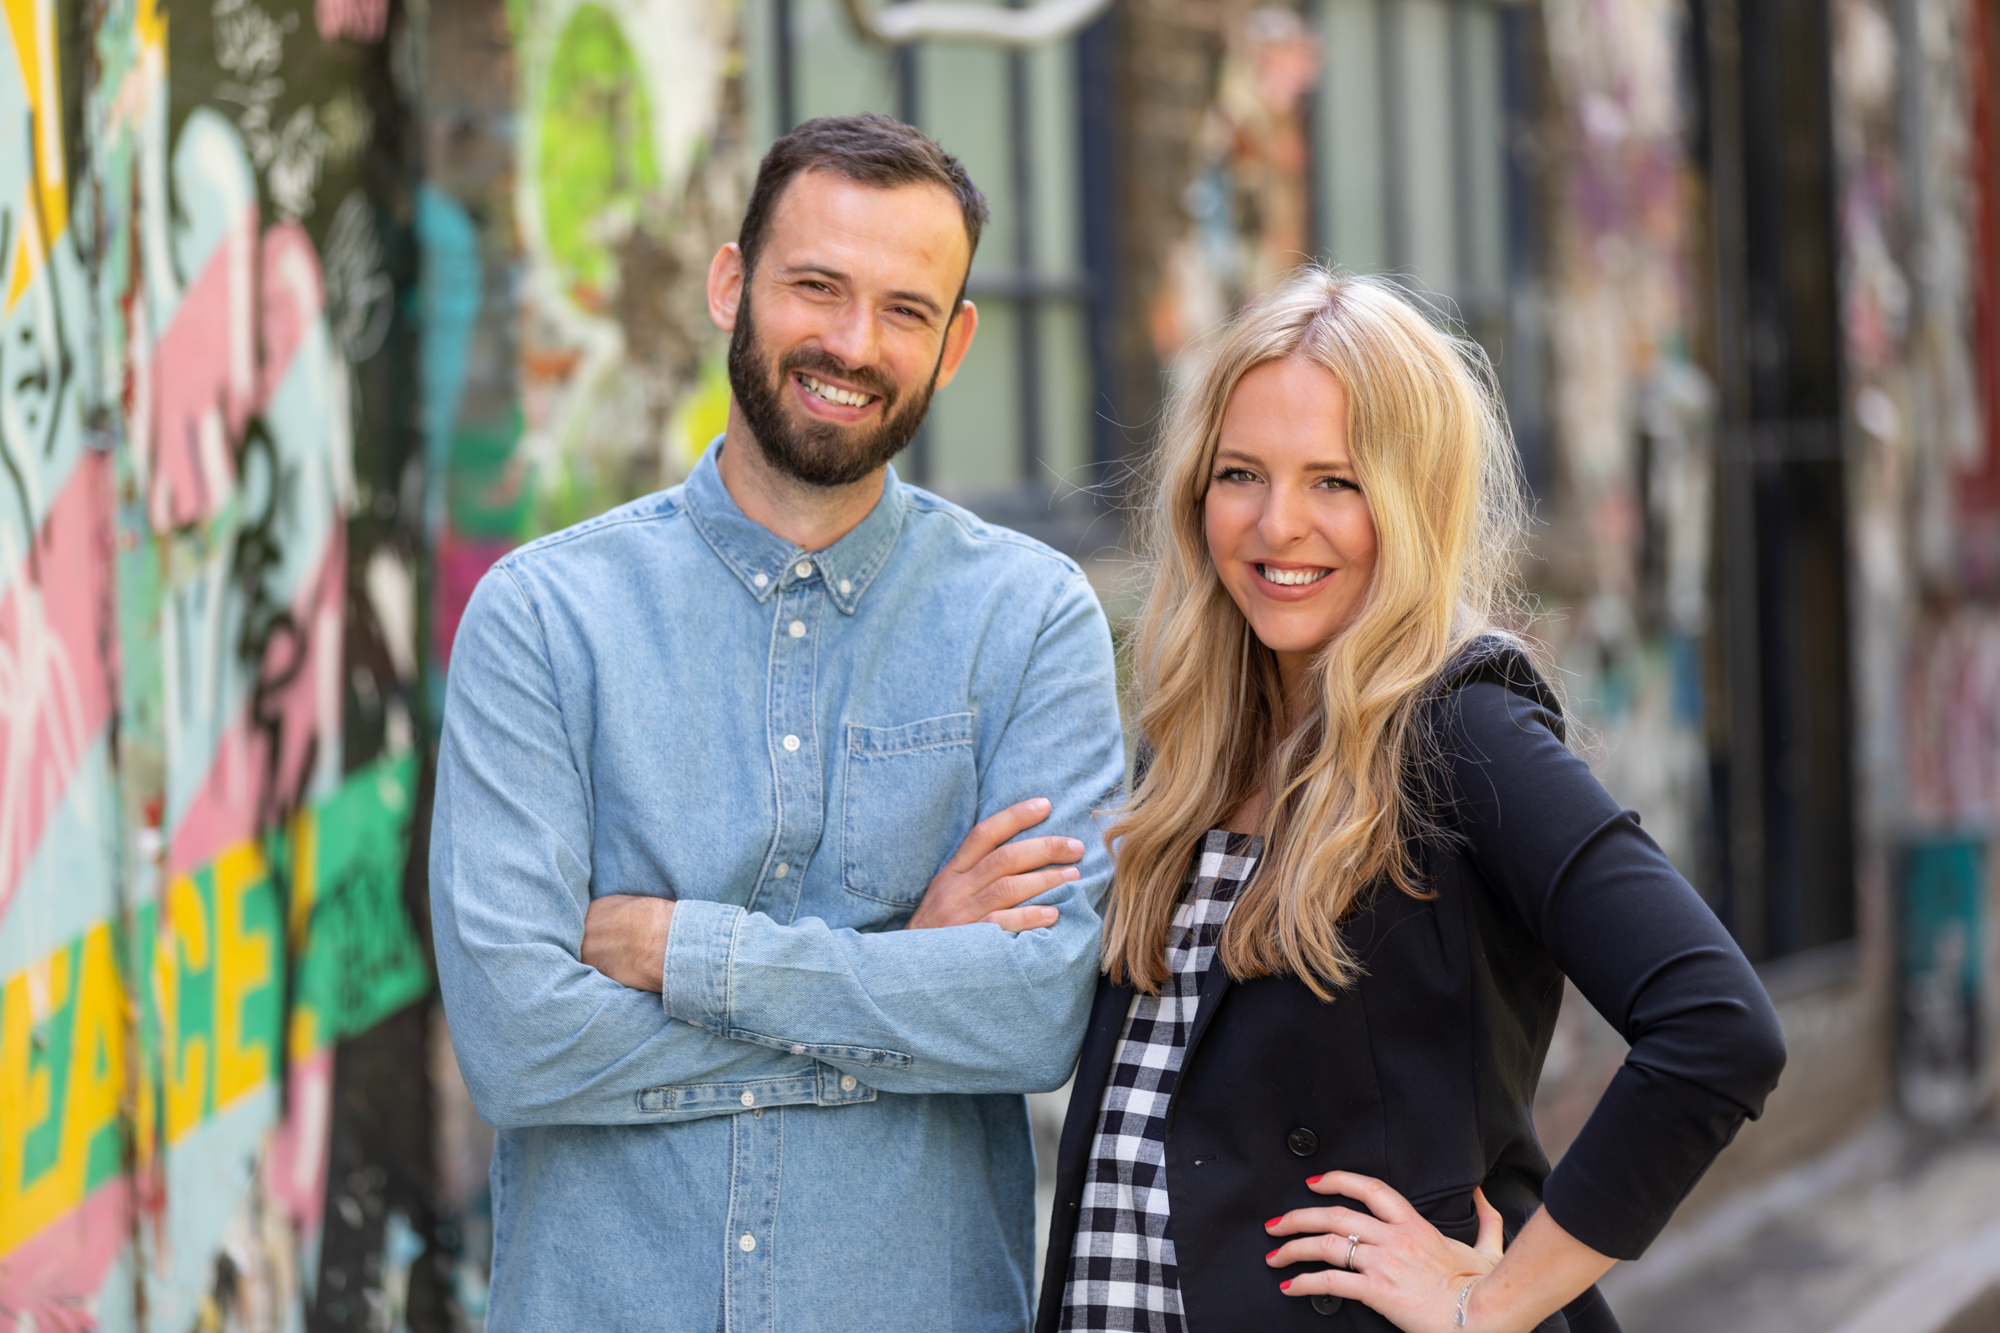 male and female founder of mhf corporate video production company smiling to camera in front of graffiti wall